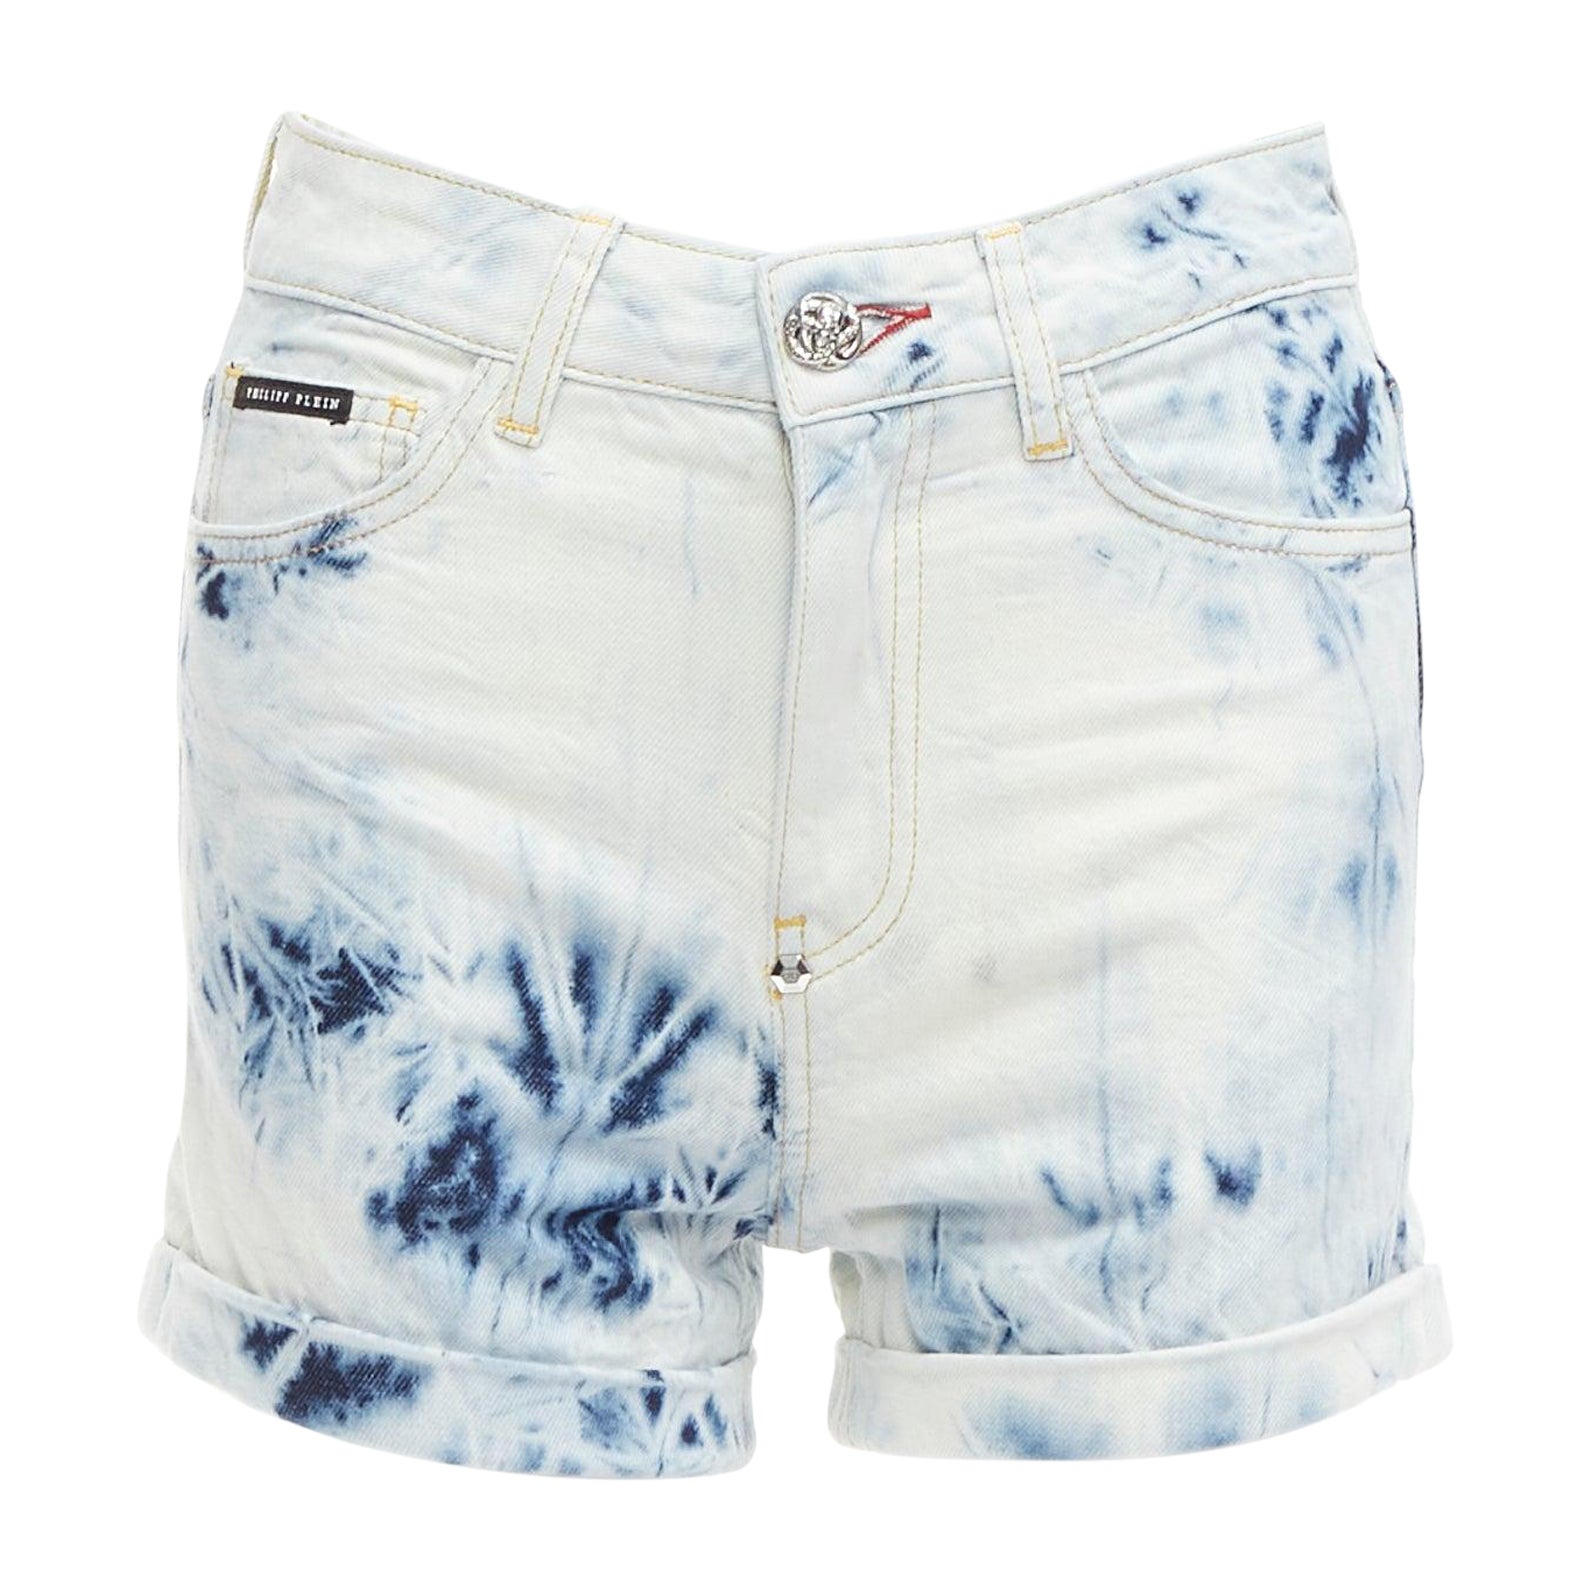 PHILLIP PLEIN Hot Pants blue acid washed logo tag cuffed shorts 25" For Sale